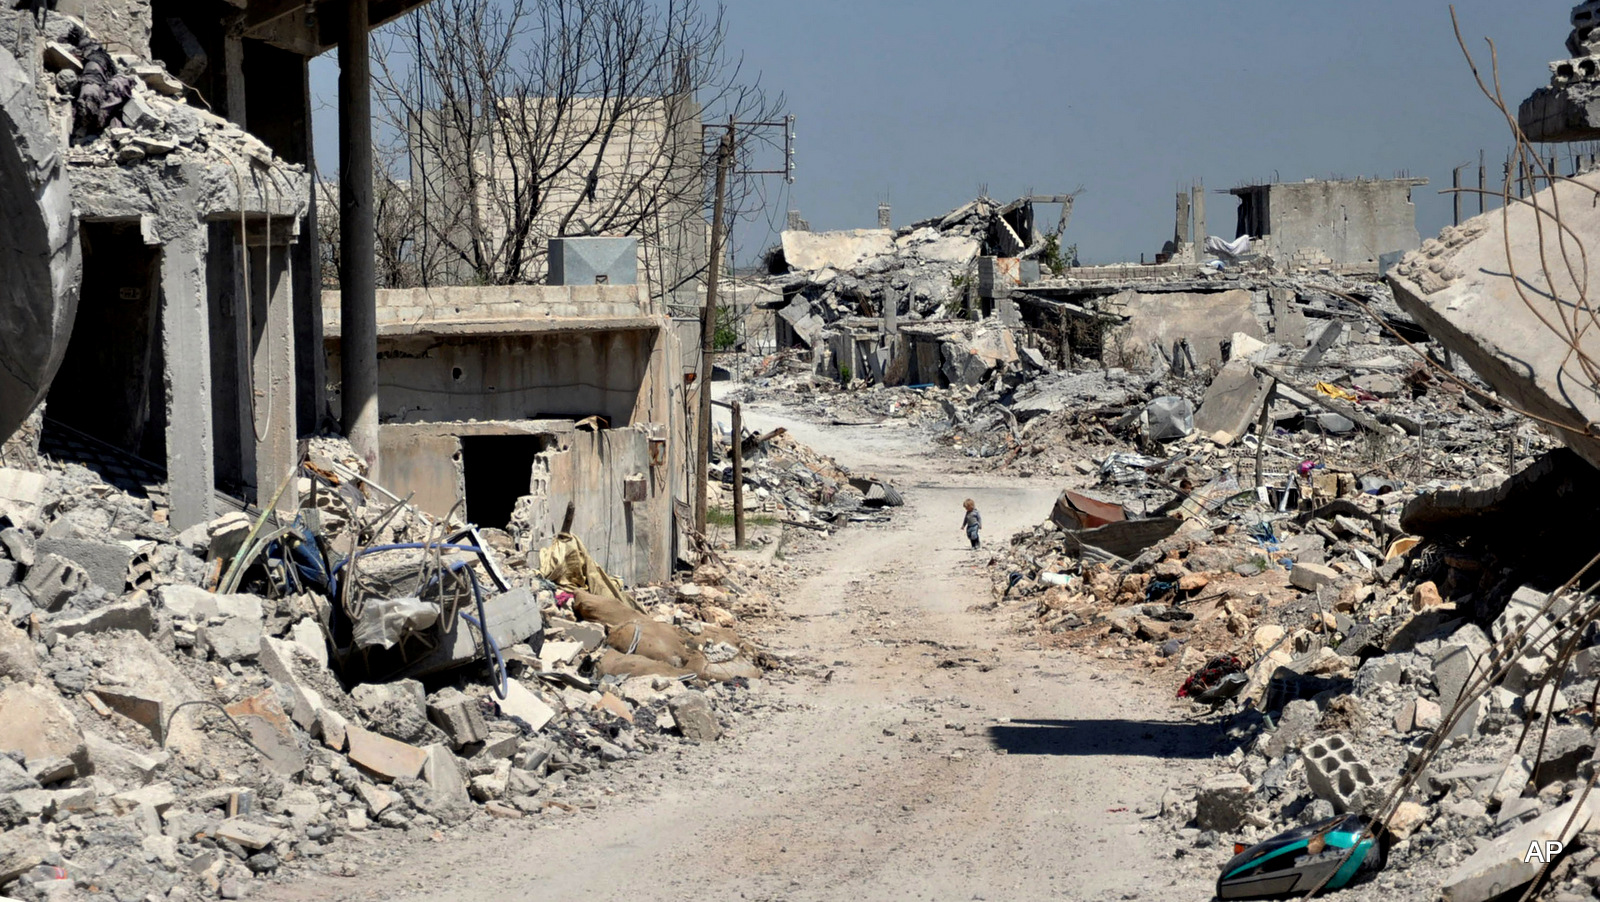 A Kurdish boy, center background, walks between buildings that were destroyed during the battle between the U.S. backed Kurdish forces and the Islamic State fighters, in Kobani, north Syria. The Kurdish town on the Turkish-Syrian border is still a haunting, apocalyptic vista of hollowed out facades and streets littered with unexploded ordnance - a testimony to the massive price that came with the victory over IS.